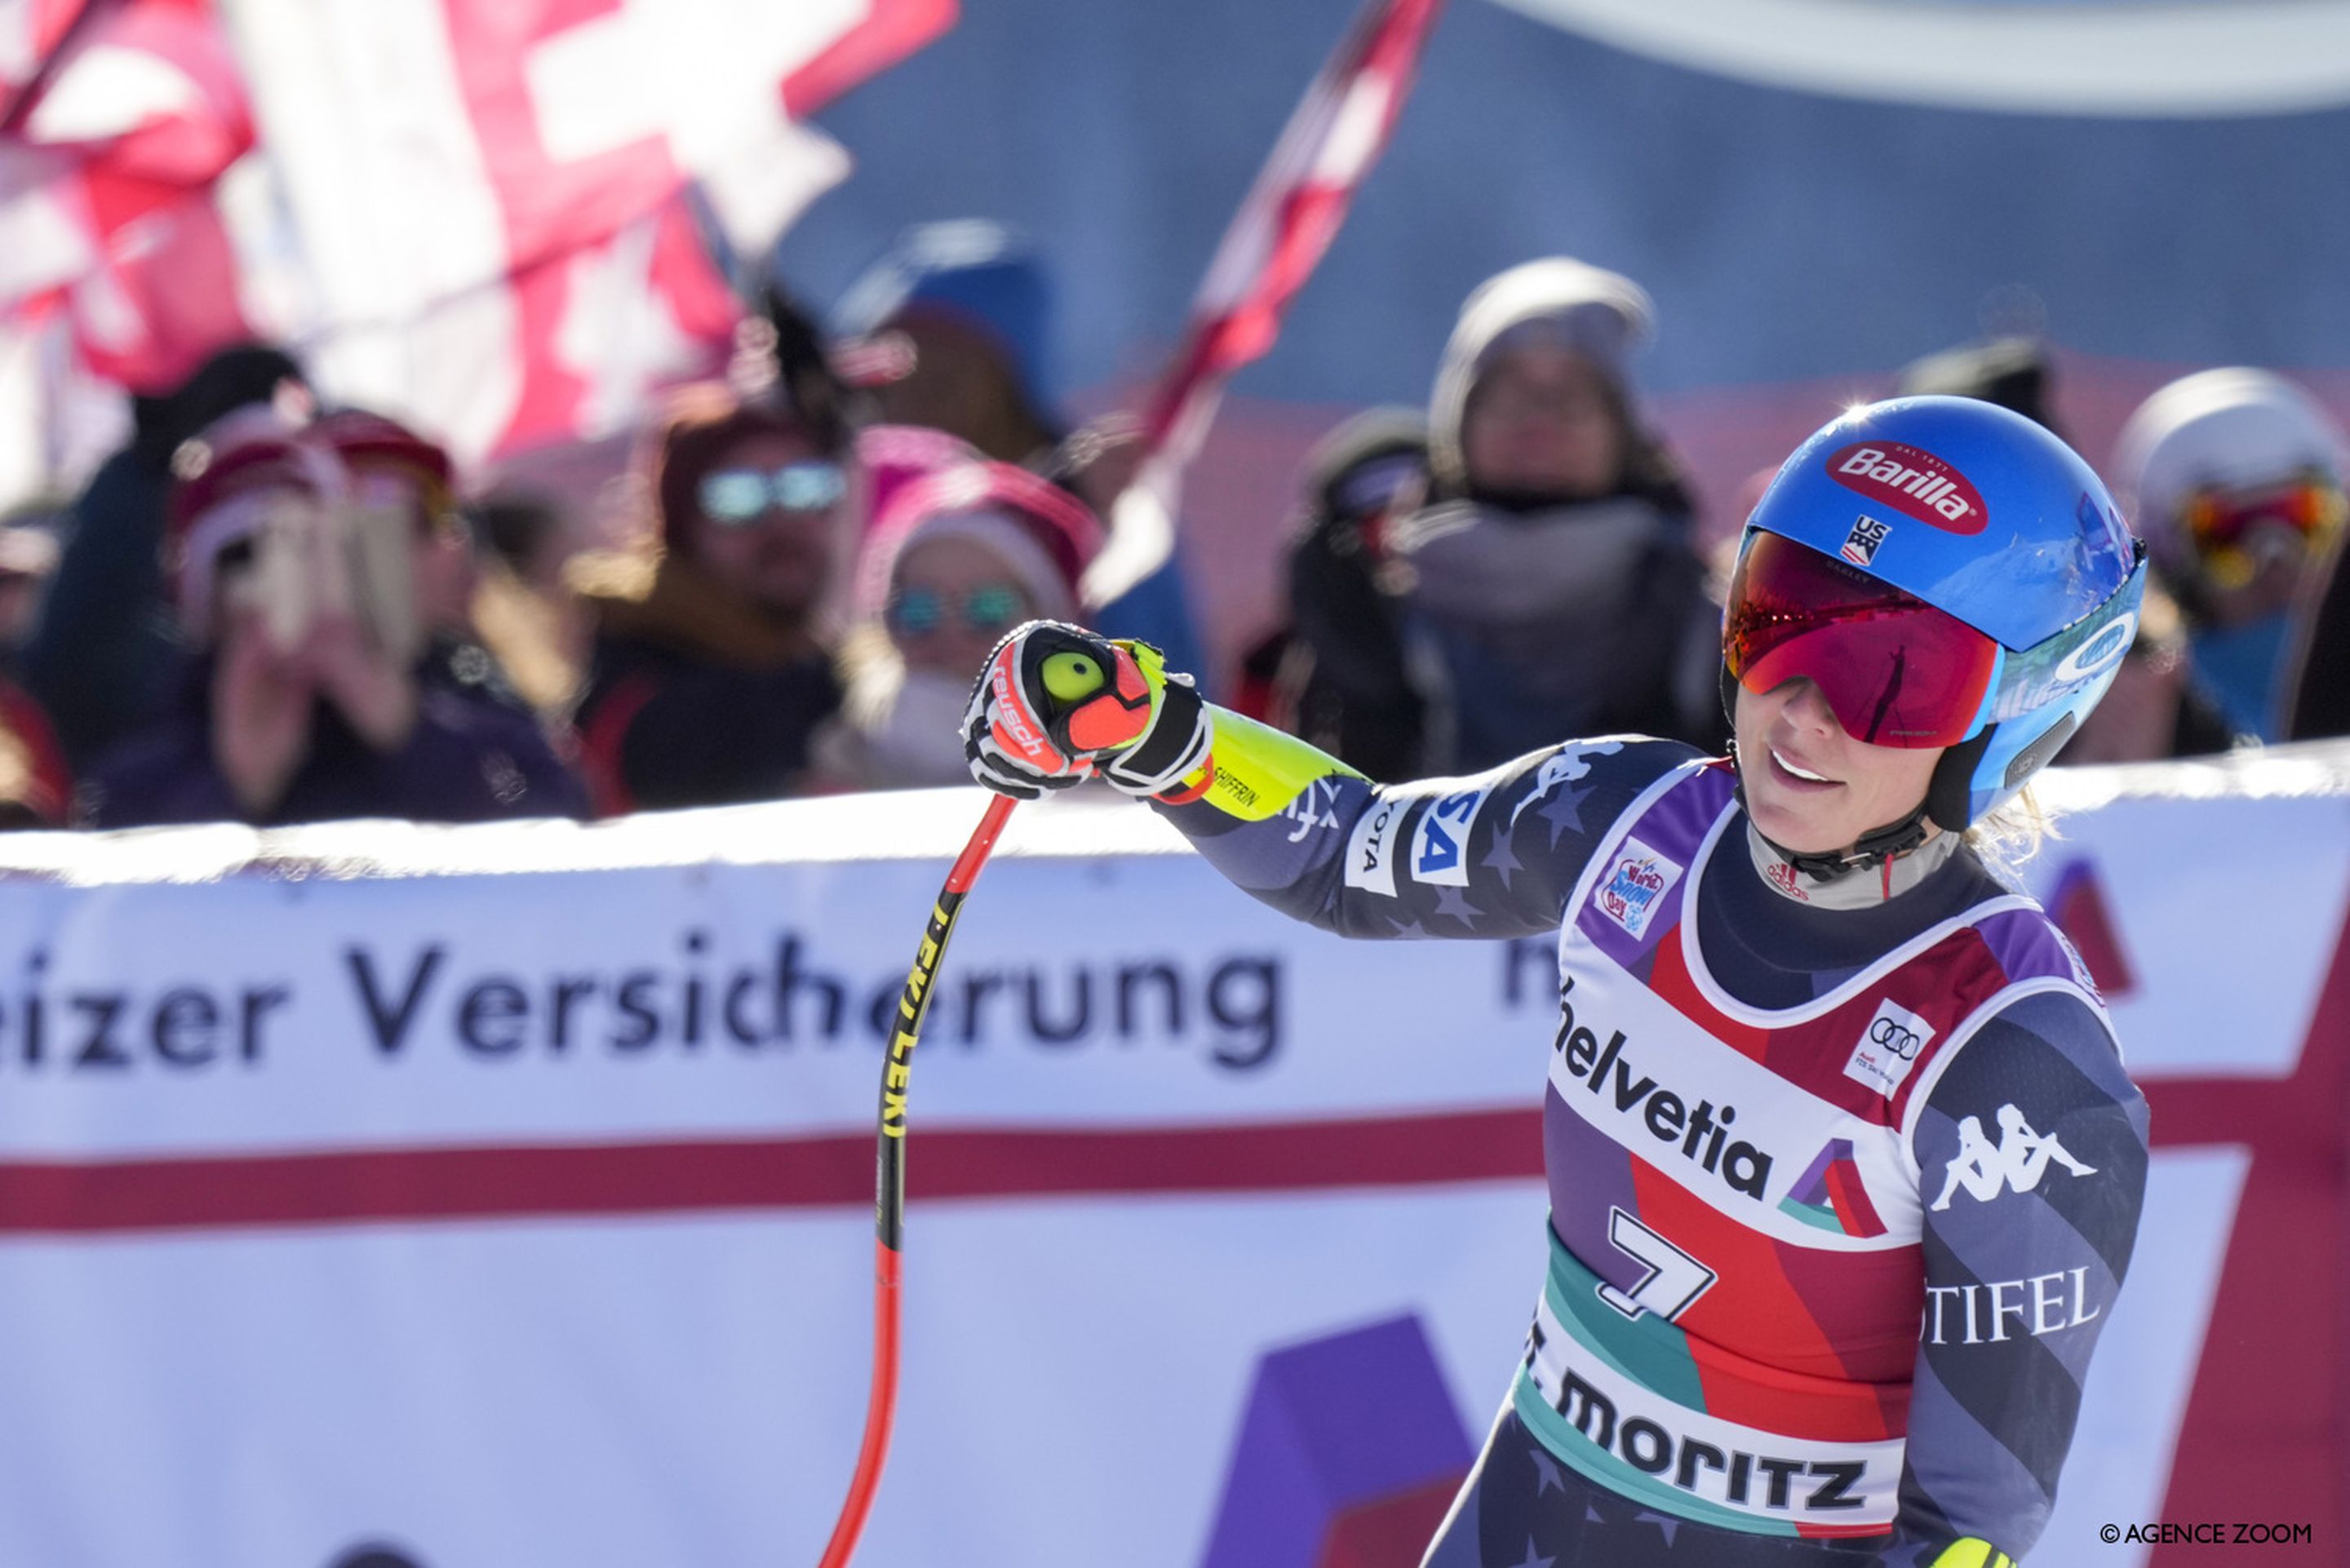 Shiffrin in the finish area on Sunday after taking a lead she would not relinquish (Agence Zoom)